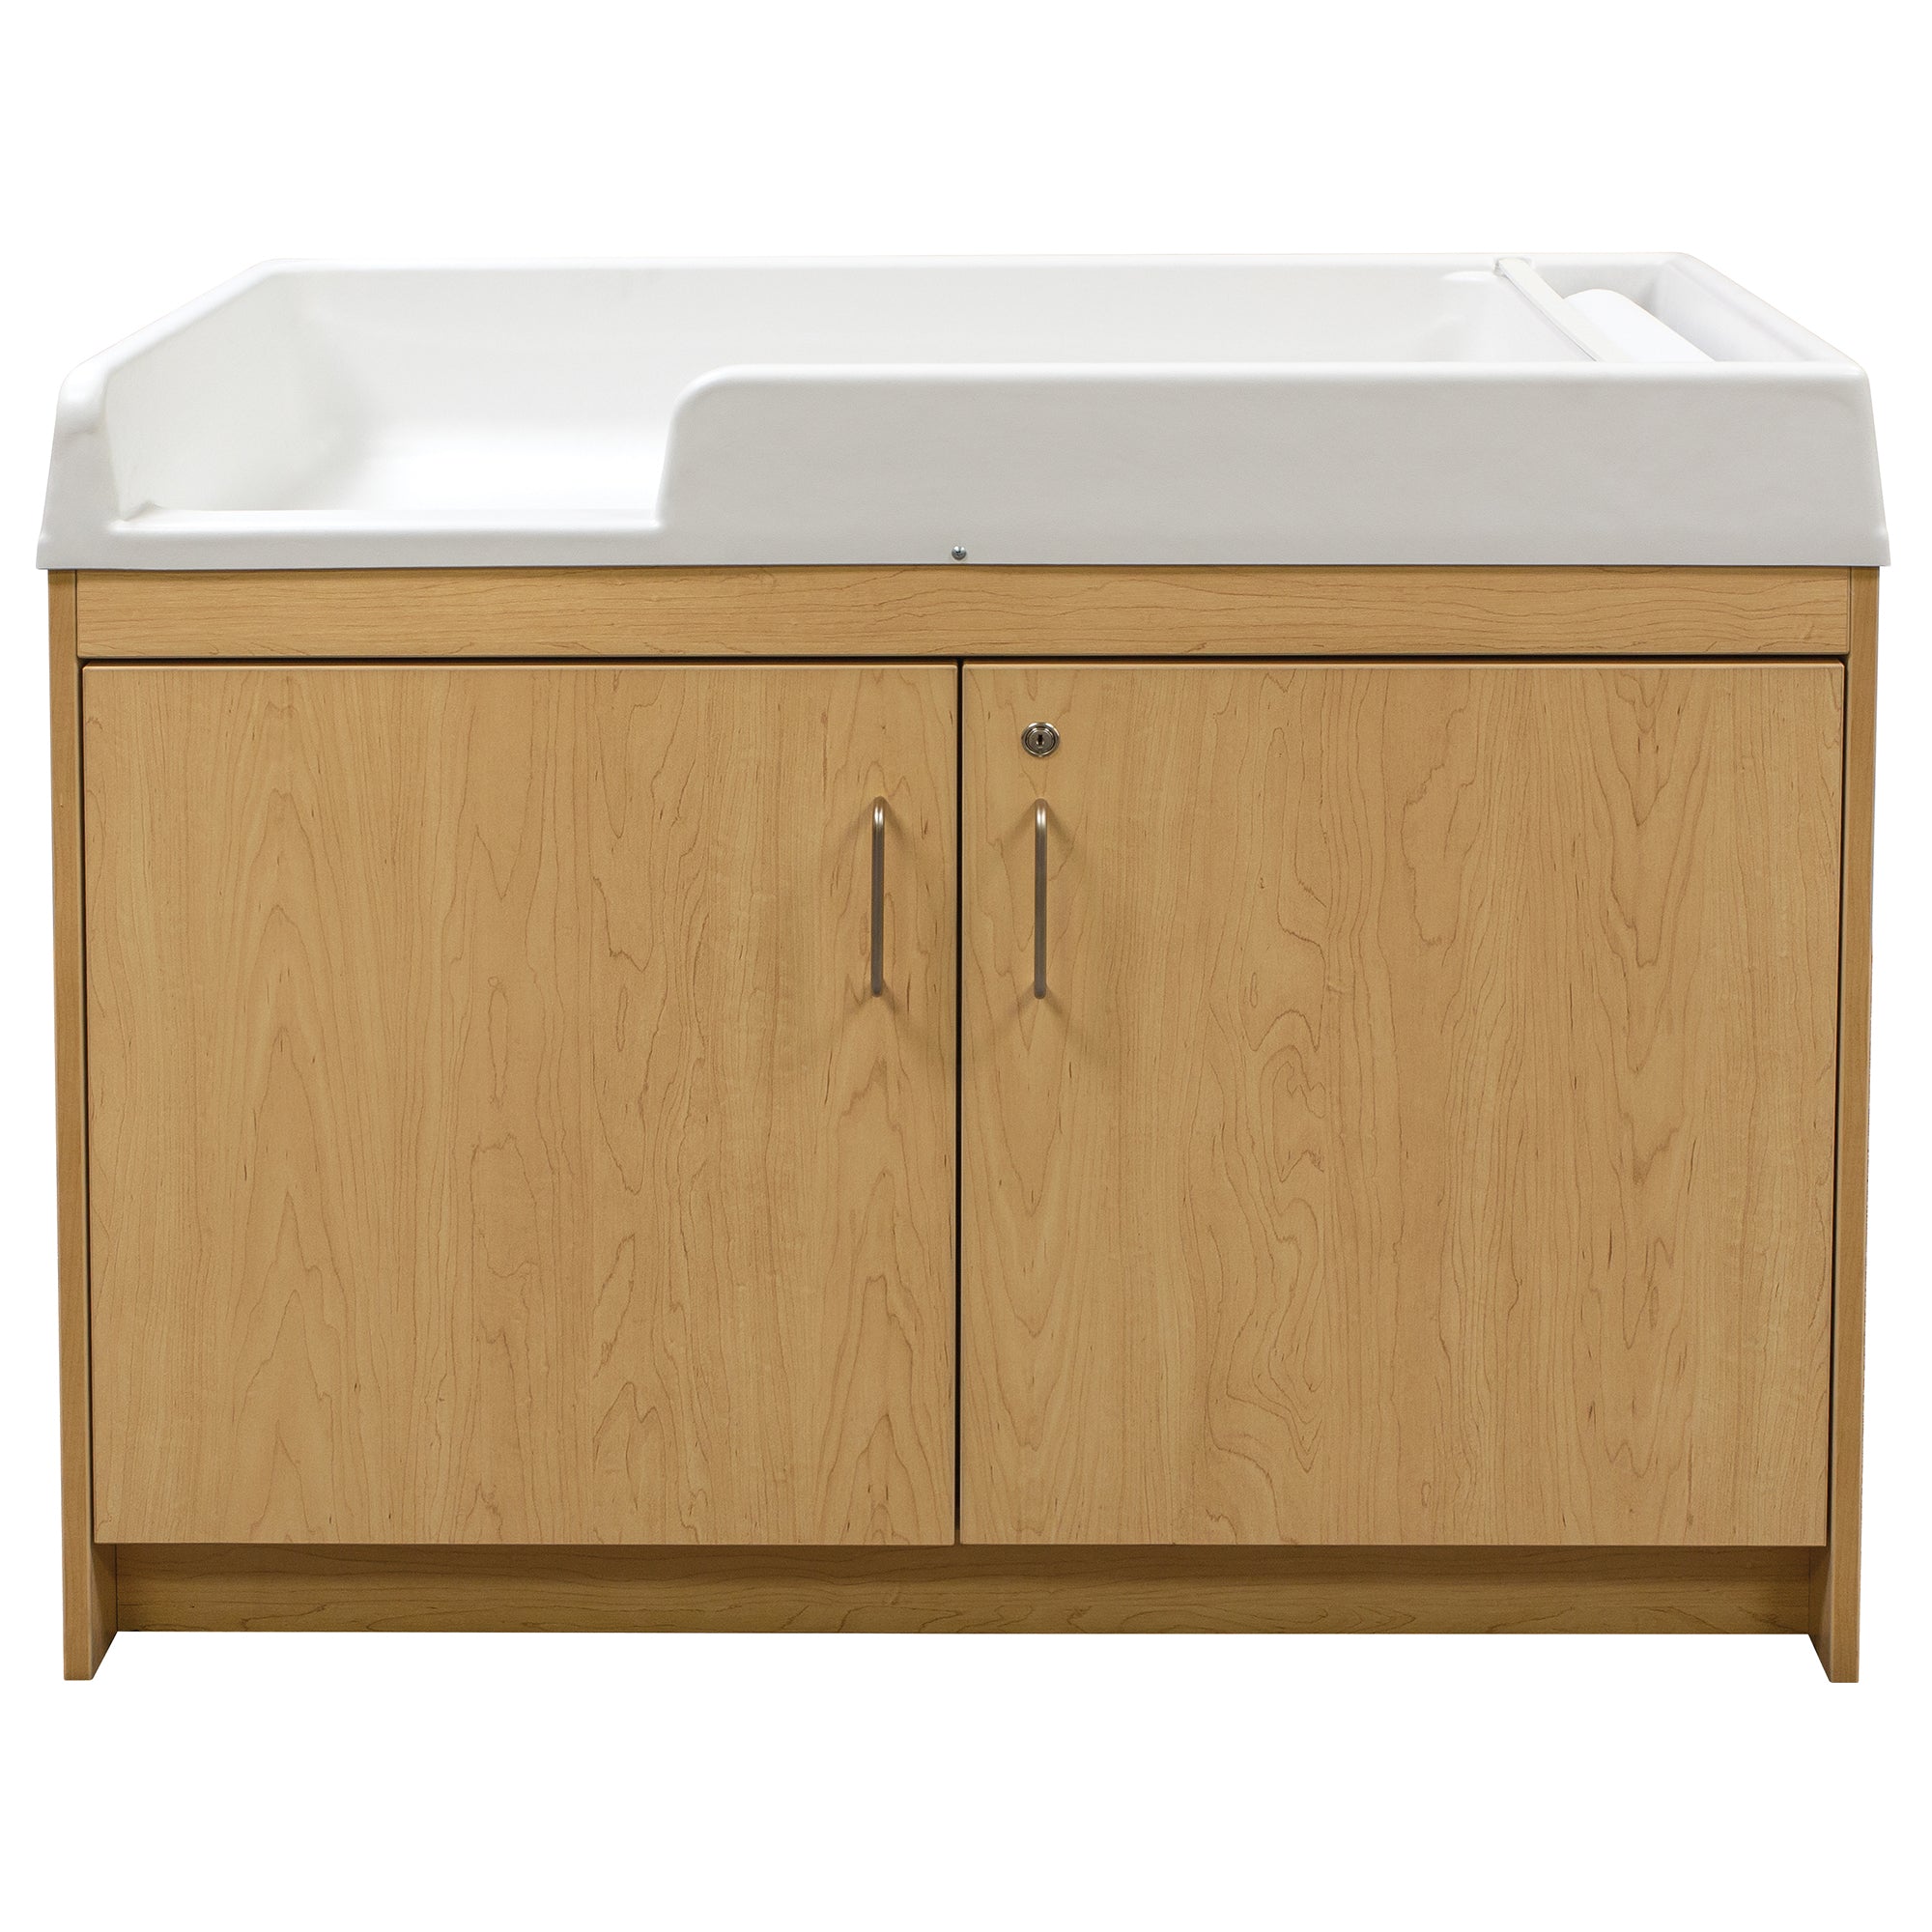 Infant changing table with double doors and lock.